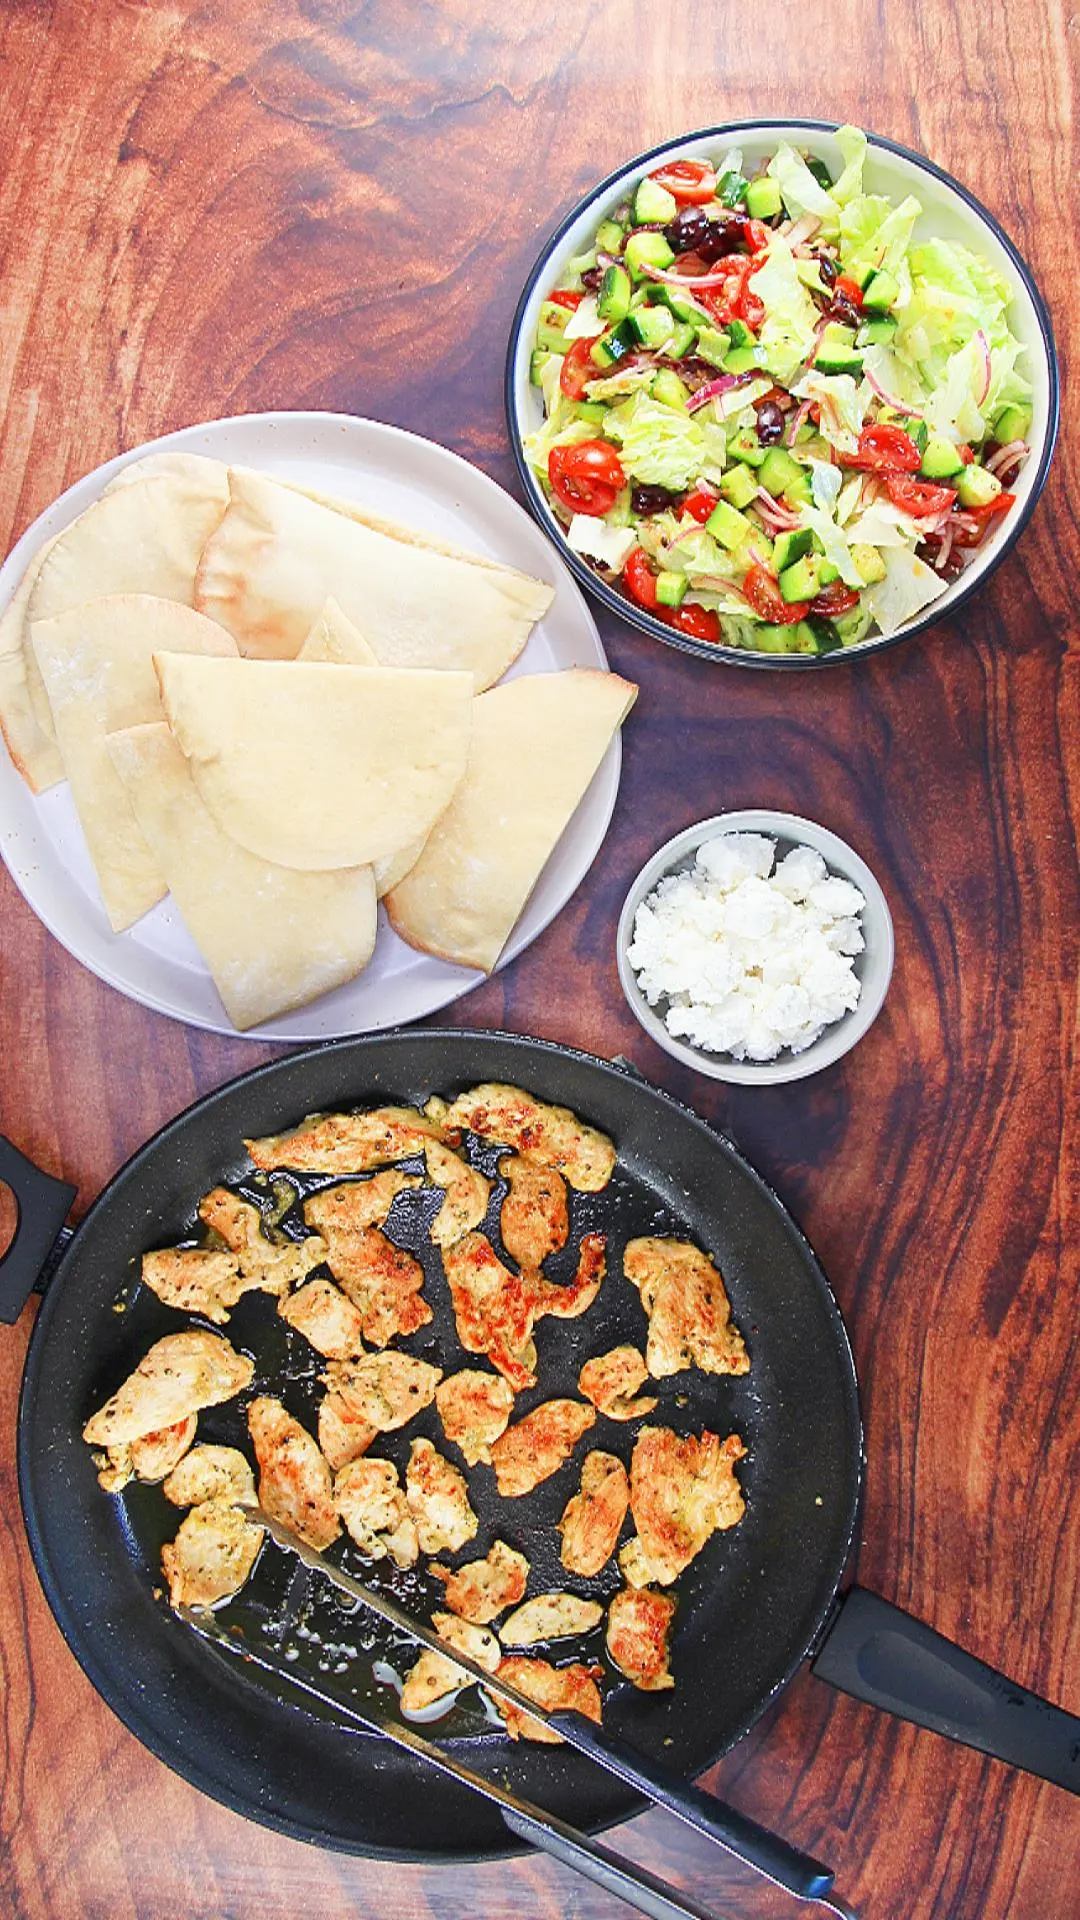 Top down view of ingredients used to make chicken gyros including sliced pita bread, browned chicken, lettuce, cucumbers, red onion, tomatoes and feta cheese.